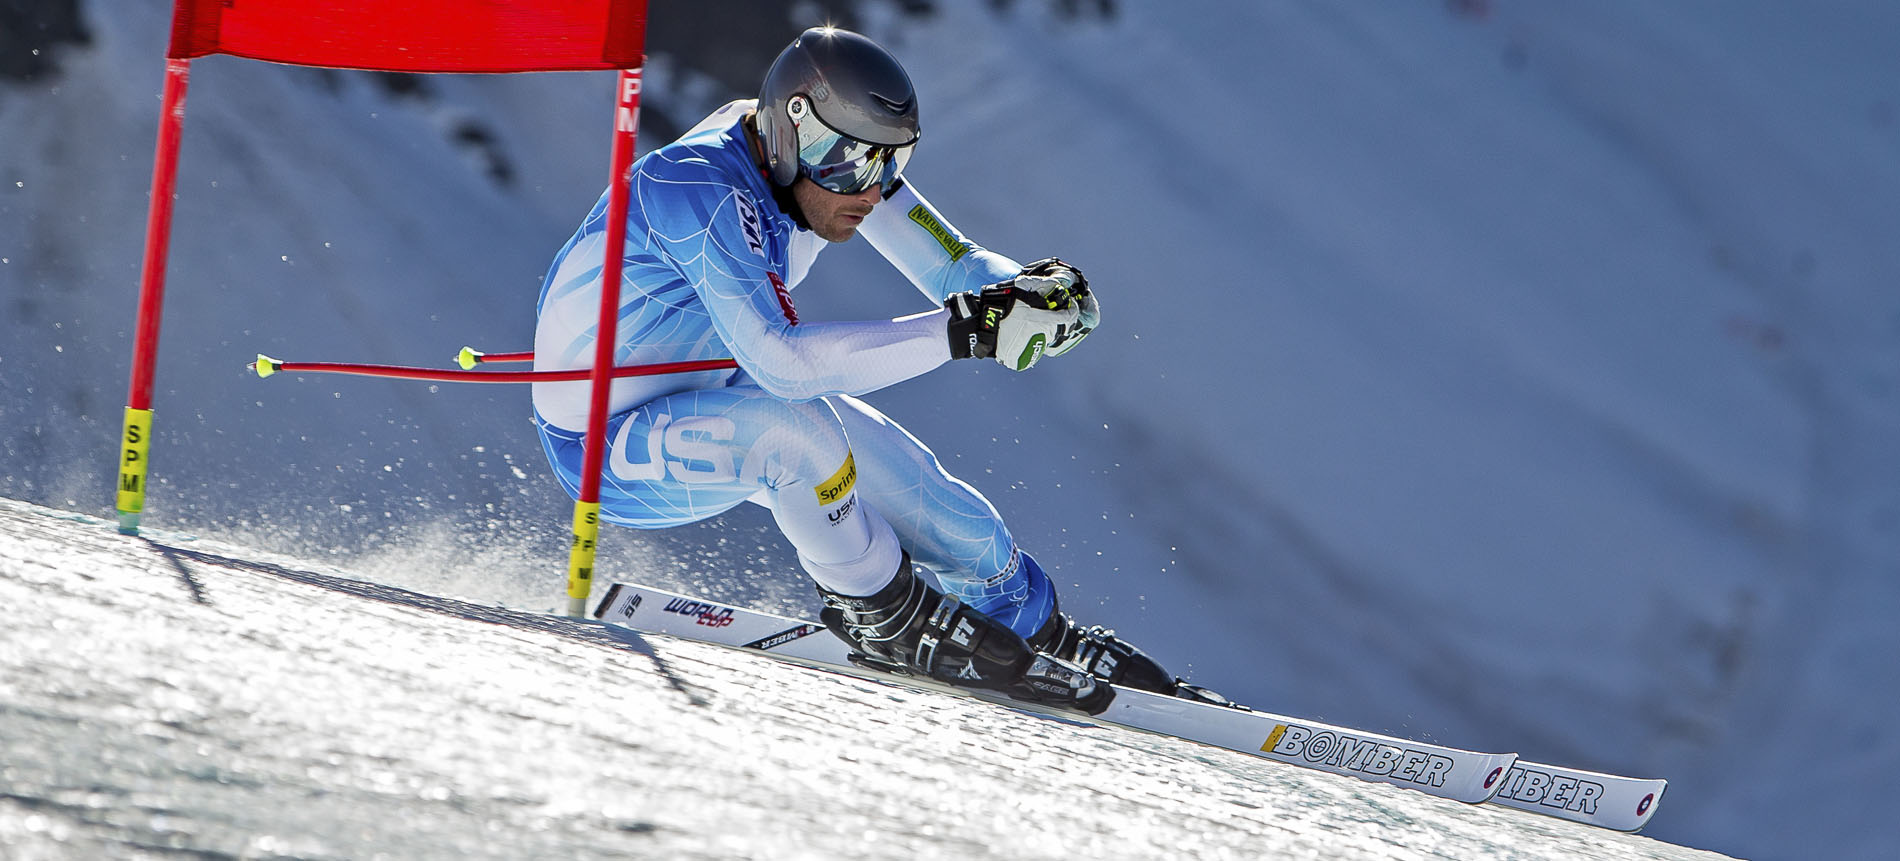 Featured Outlaw: Bode Miller - After the Last Gate - Mountain Outlaw